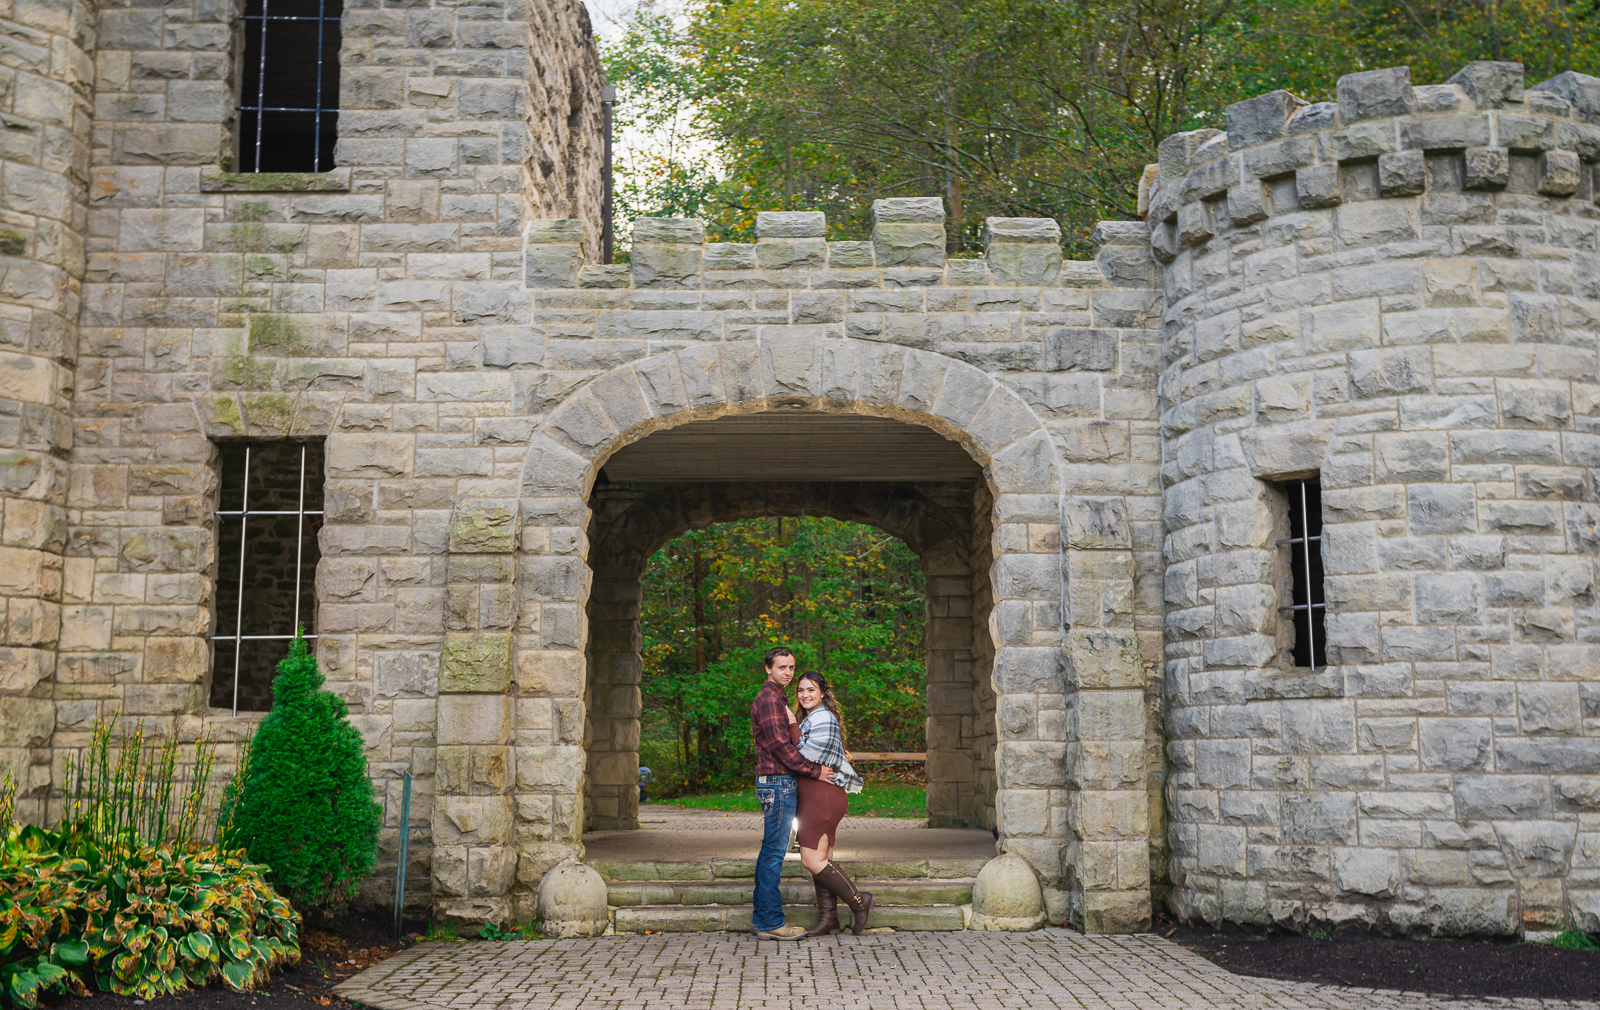 Man and woman fiancee engagement photo, outdoor fall engagement photo session at Squire's Castle, Cleveland Metroparks